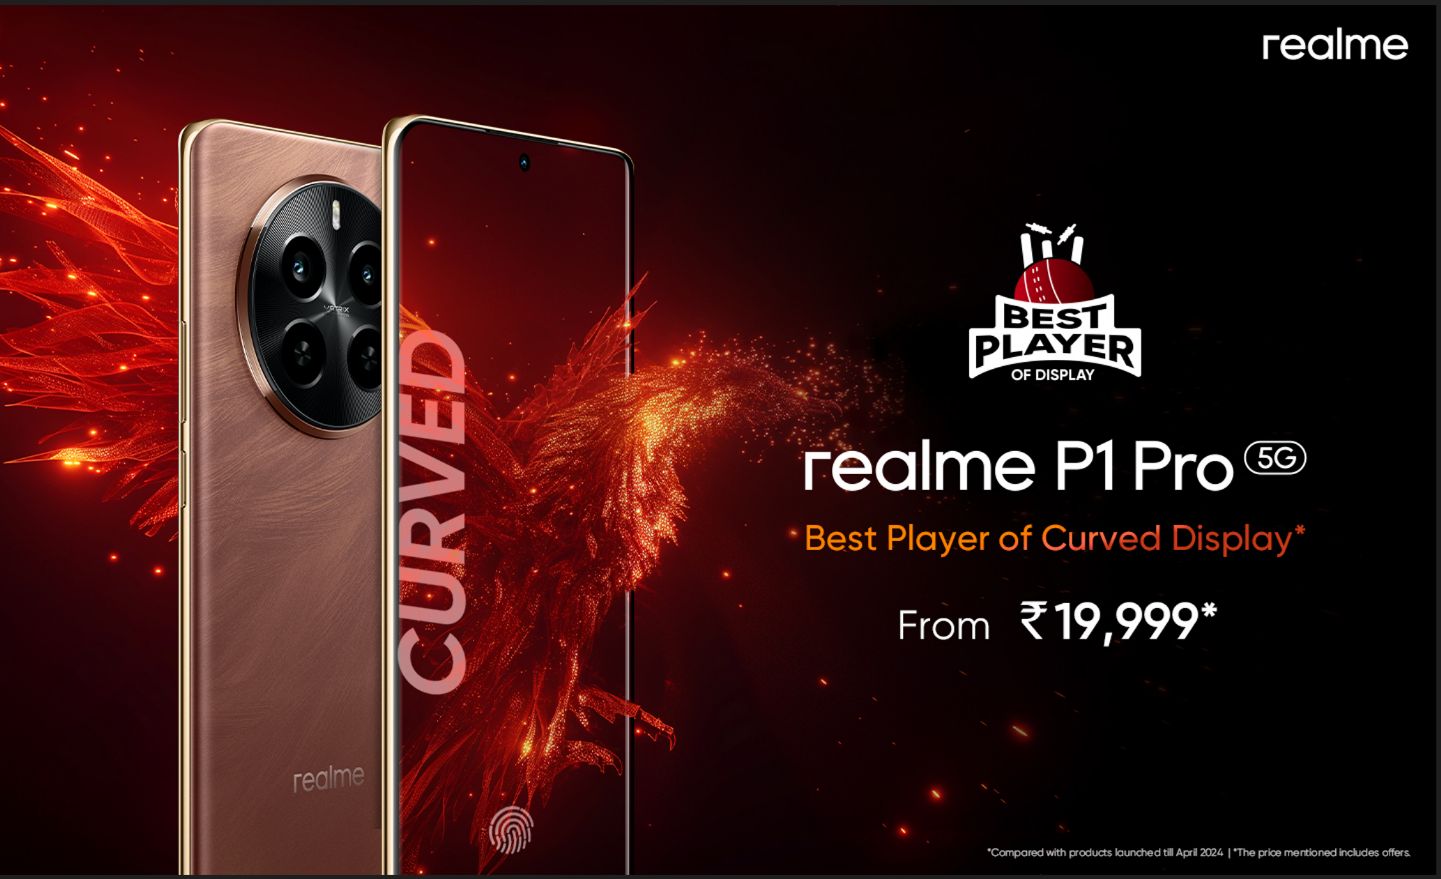 Realme P1 Pro 5G Sale Offers, Price & Availability